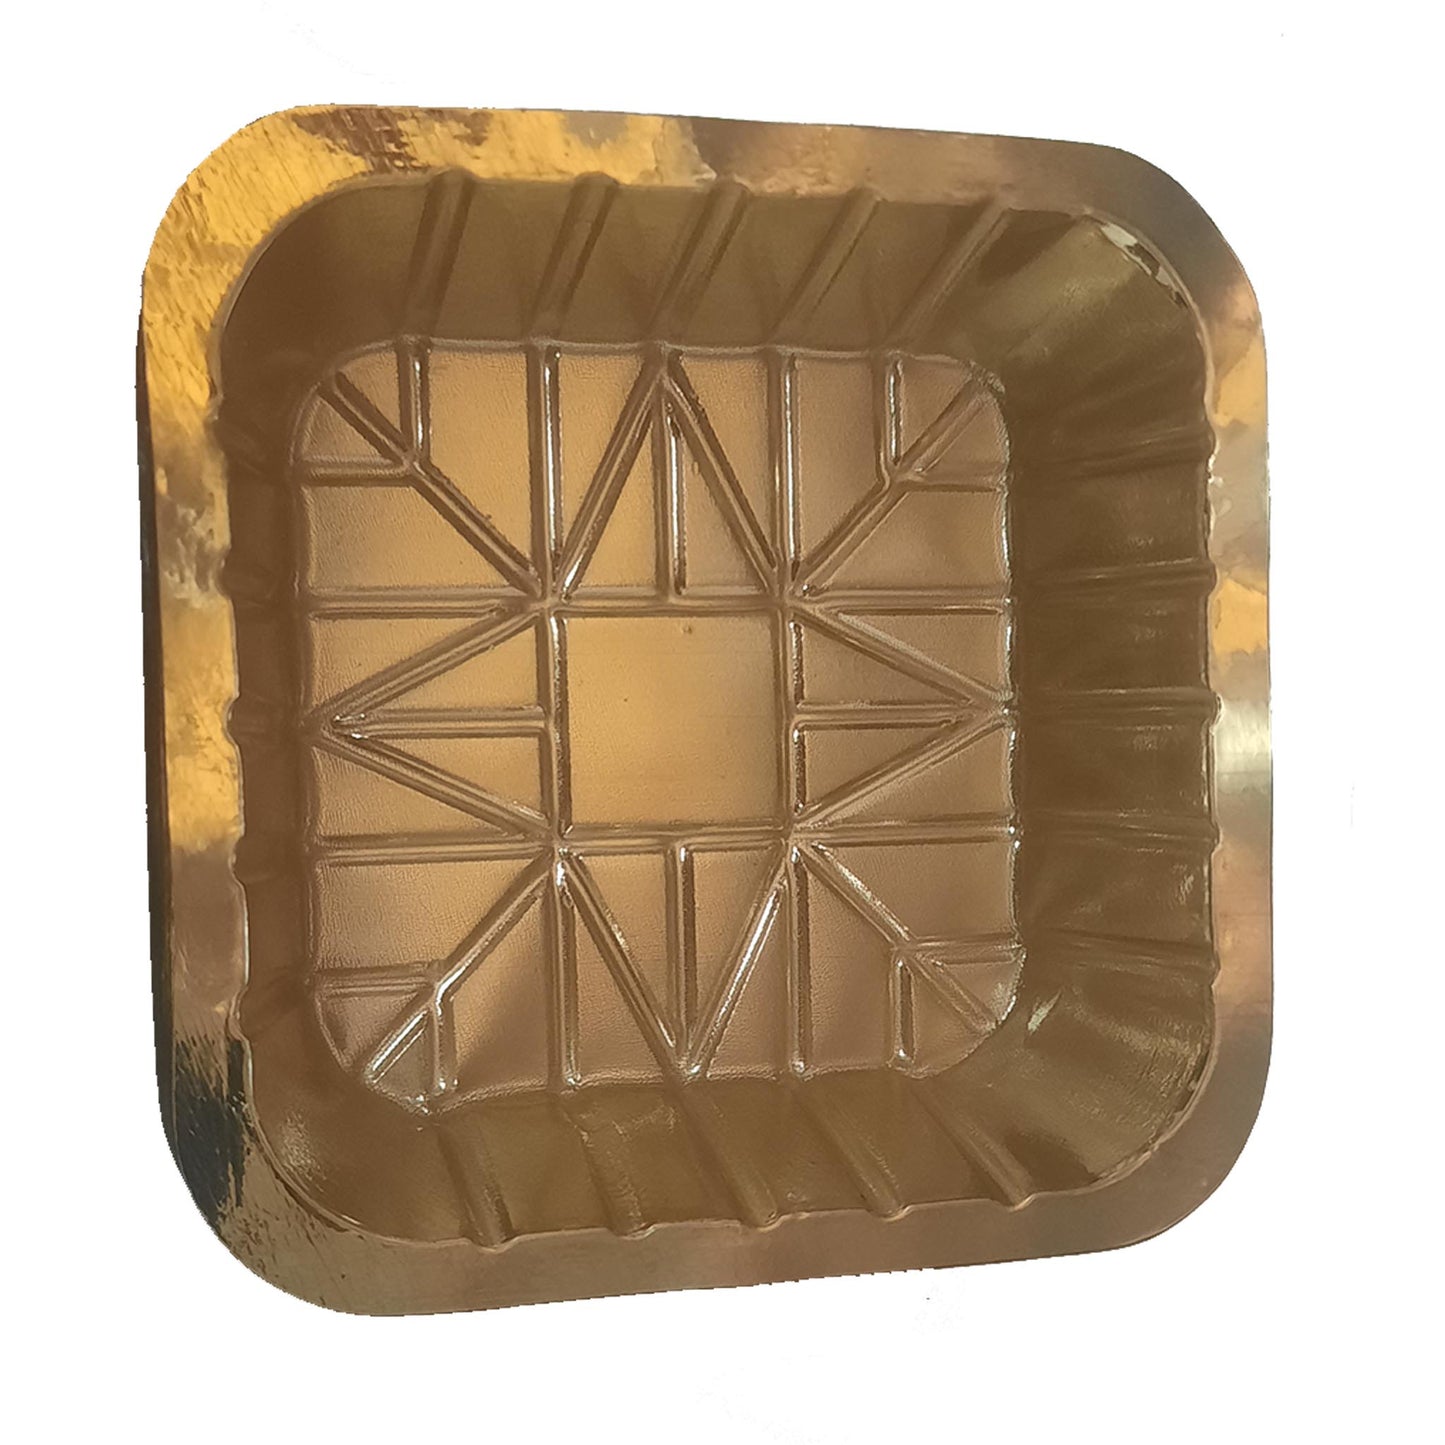 GOLD PLASTIC SQUARE SHAPED DISPOSABLE FOOD/DESERT TRAY (20 TRAYS)